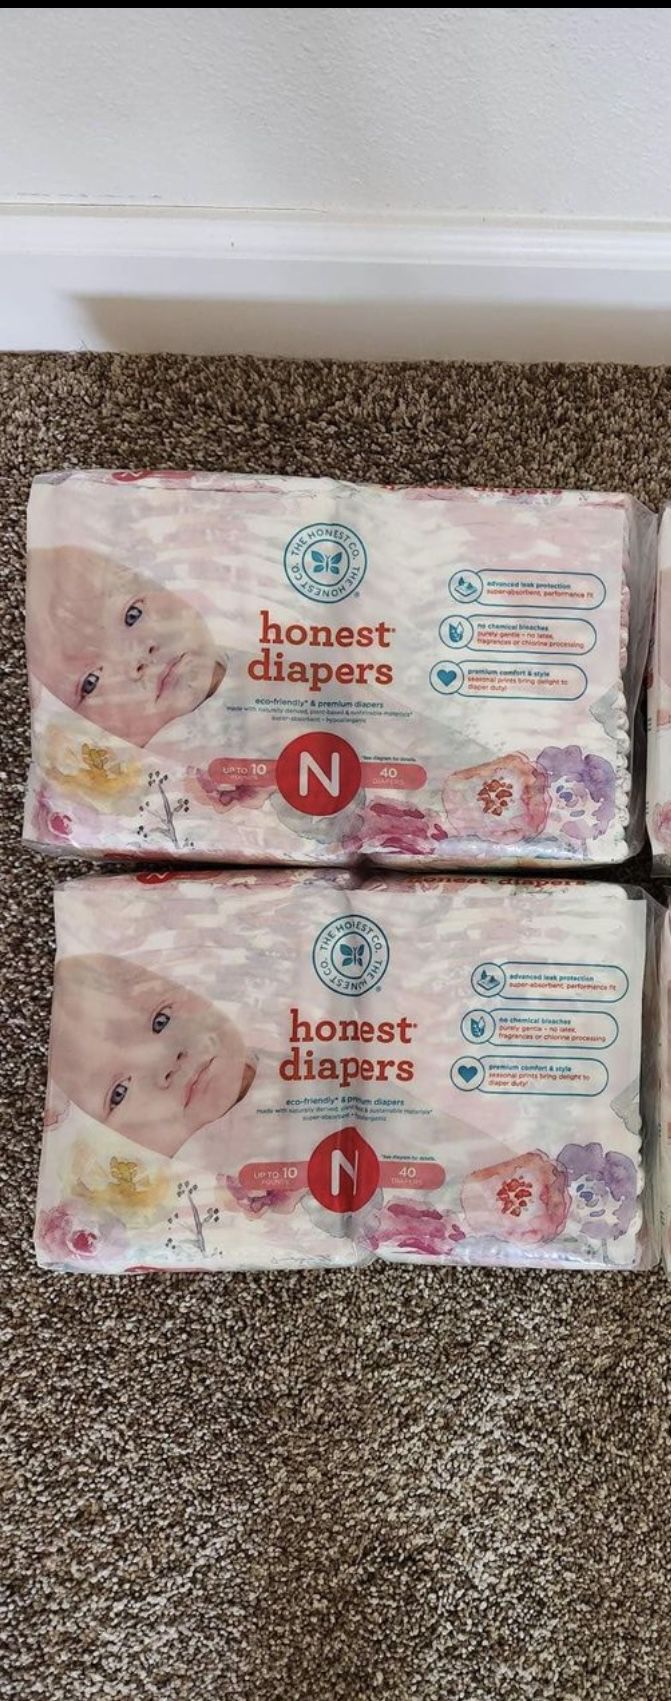 Honest co Newborn diapers, $20 for both